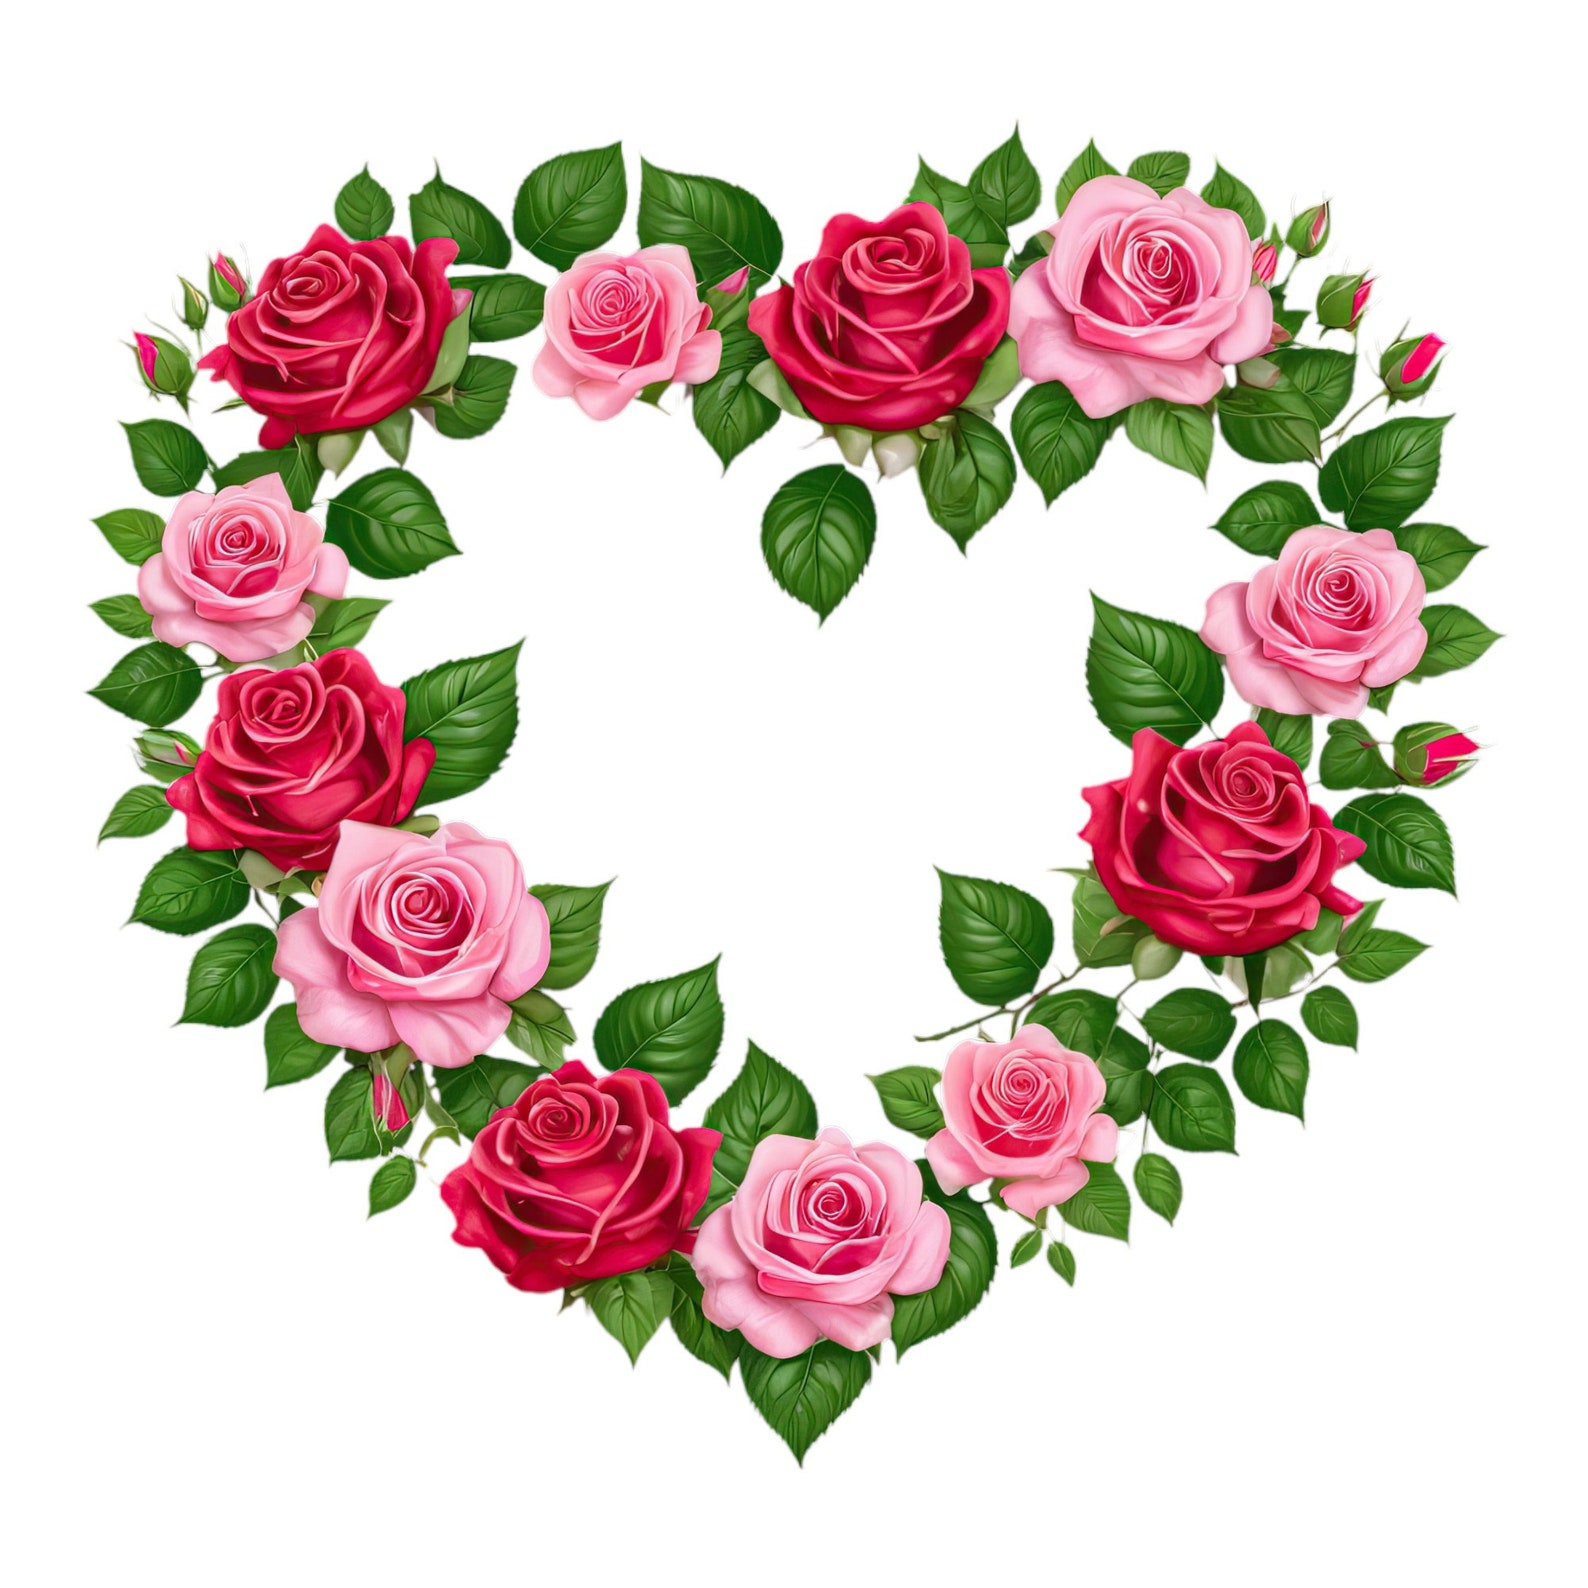 Heart-shaped Floral Wreaths Clipart, 23 High Quality PNG Transparent BG ...